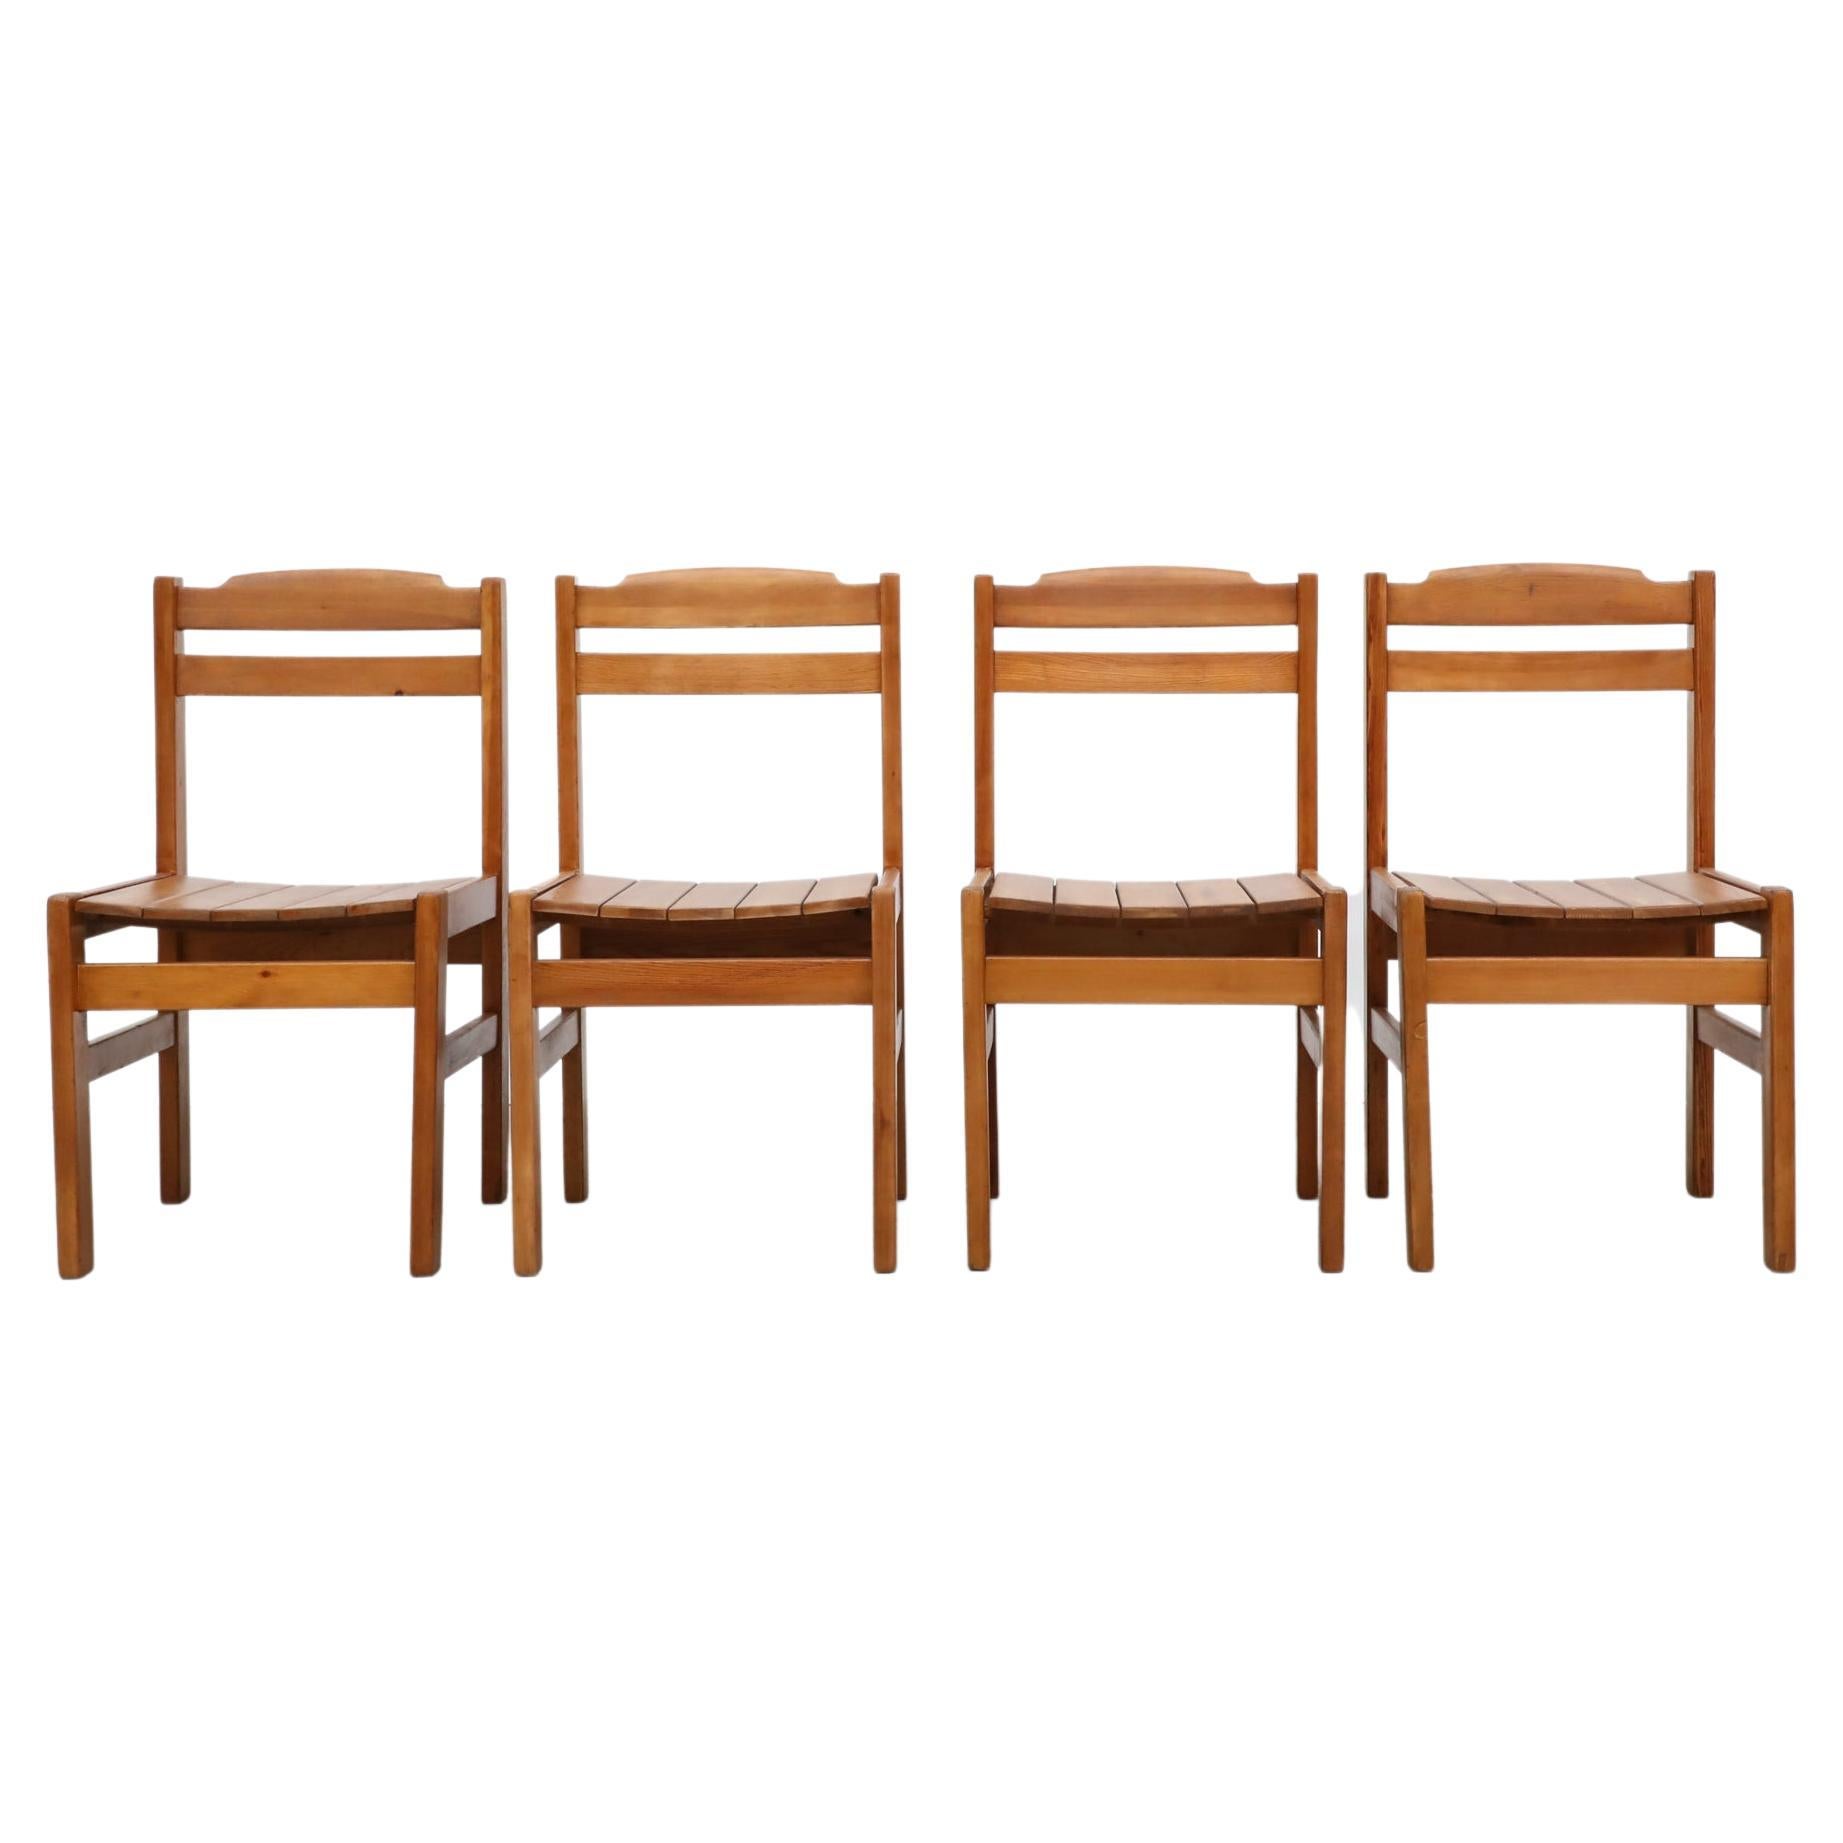 Set of 4 Ate van Apeldoorn Style Slatted Pine Dining Chairs with Lovely Top Rail